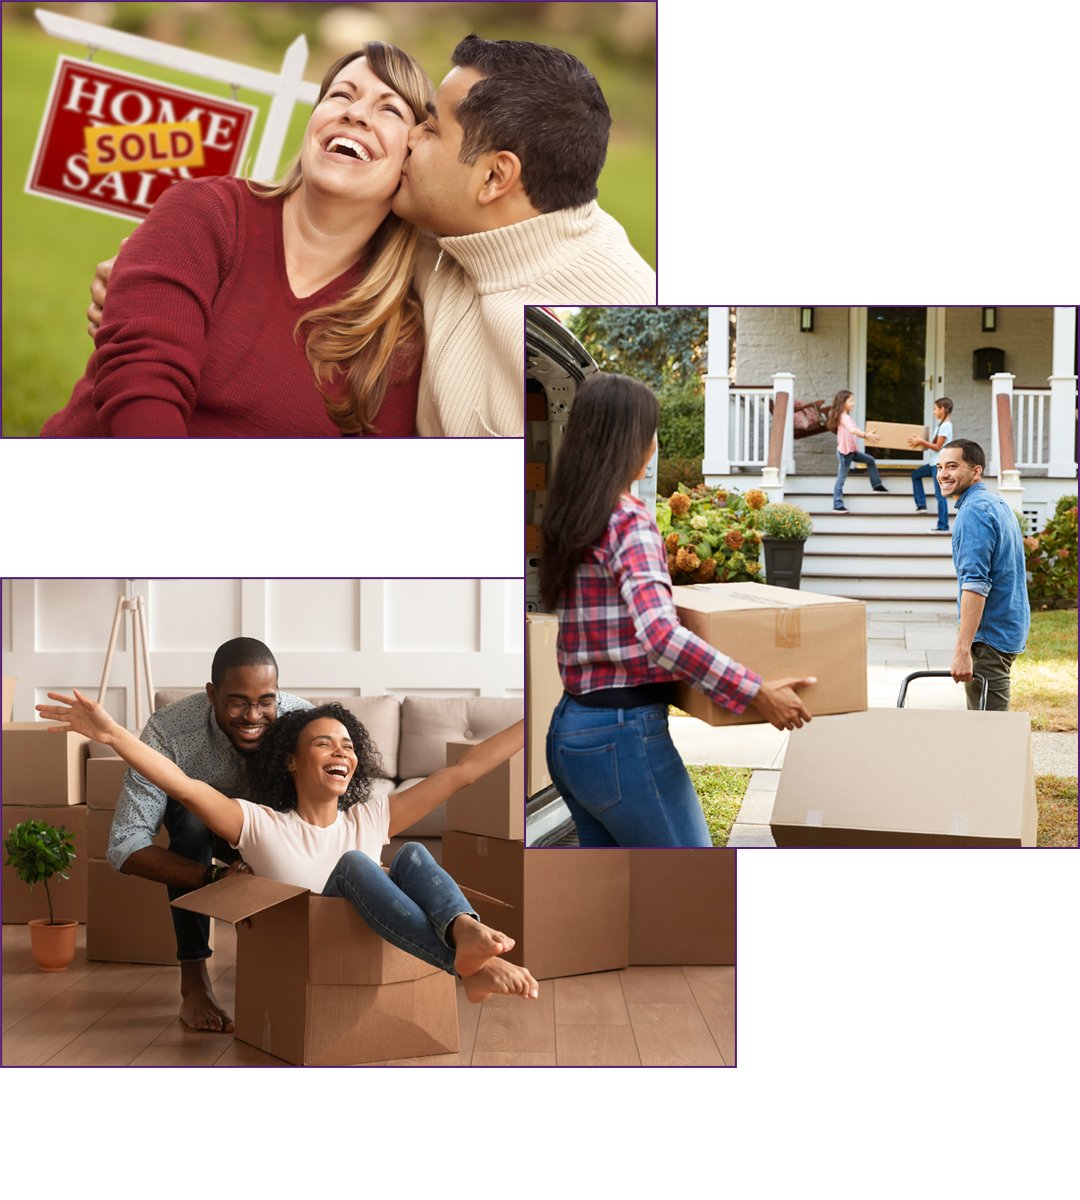 collage of photos depicting the New Homeowner person